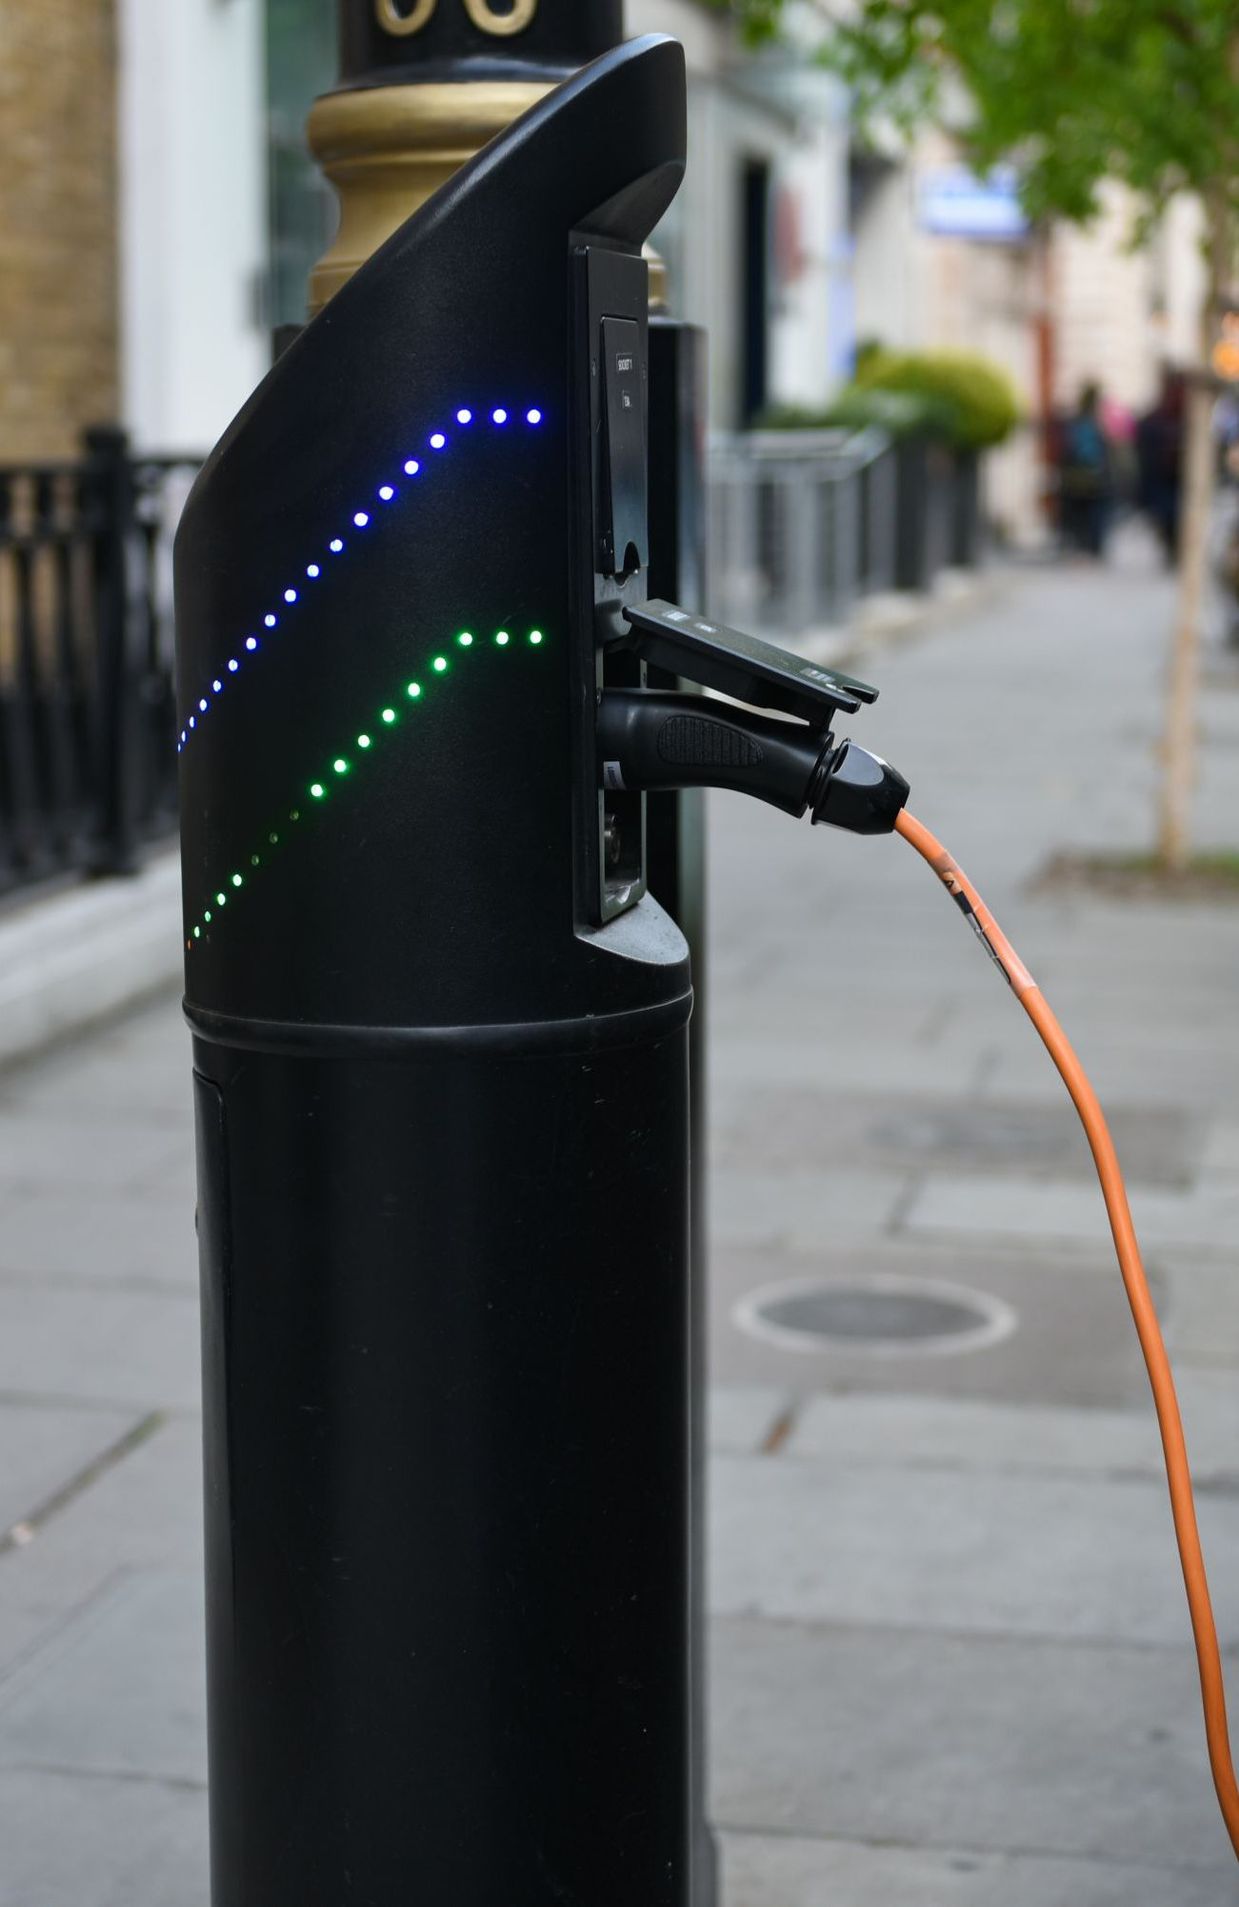 Electric car charging point, London, UK